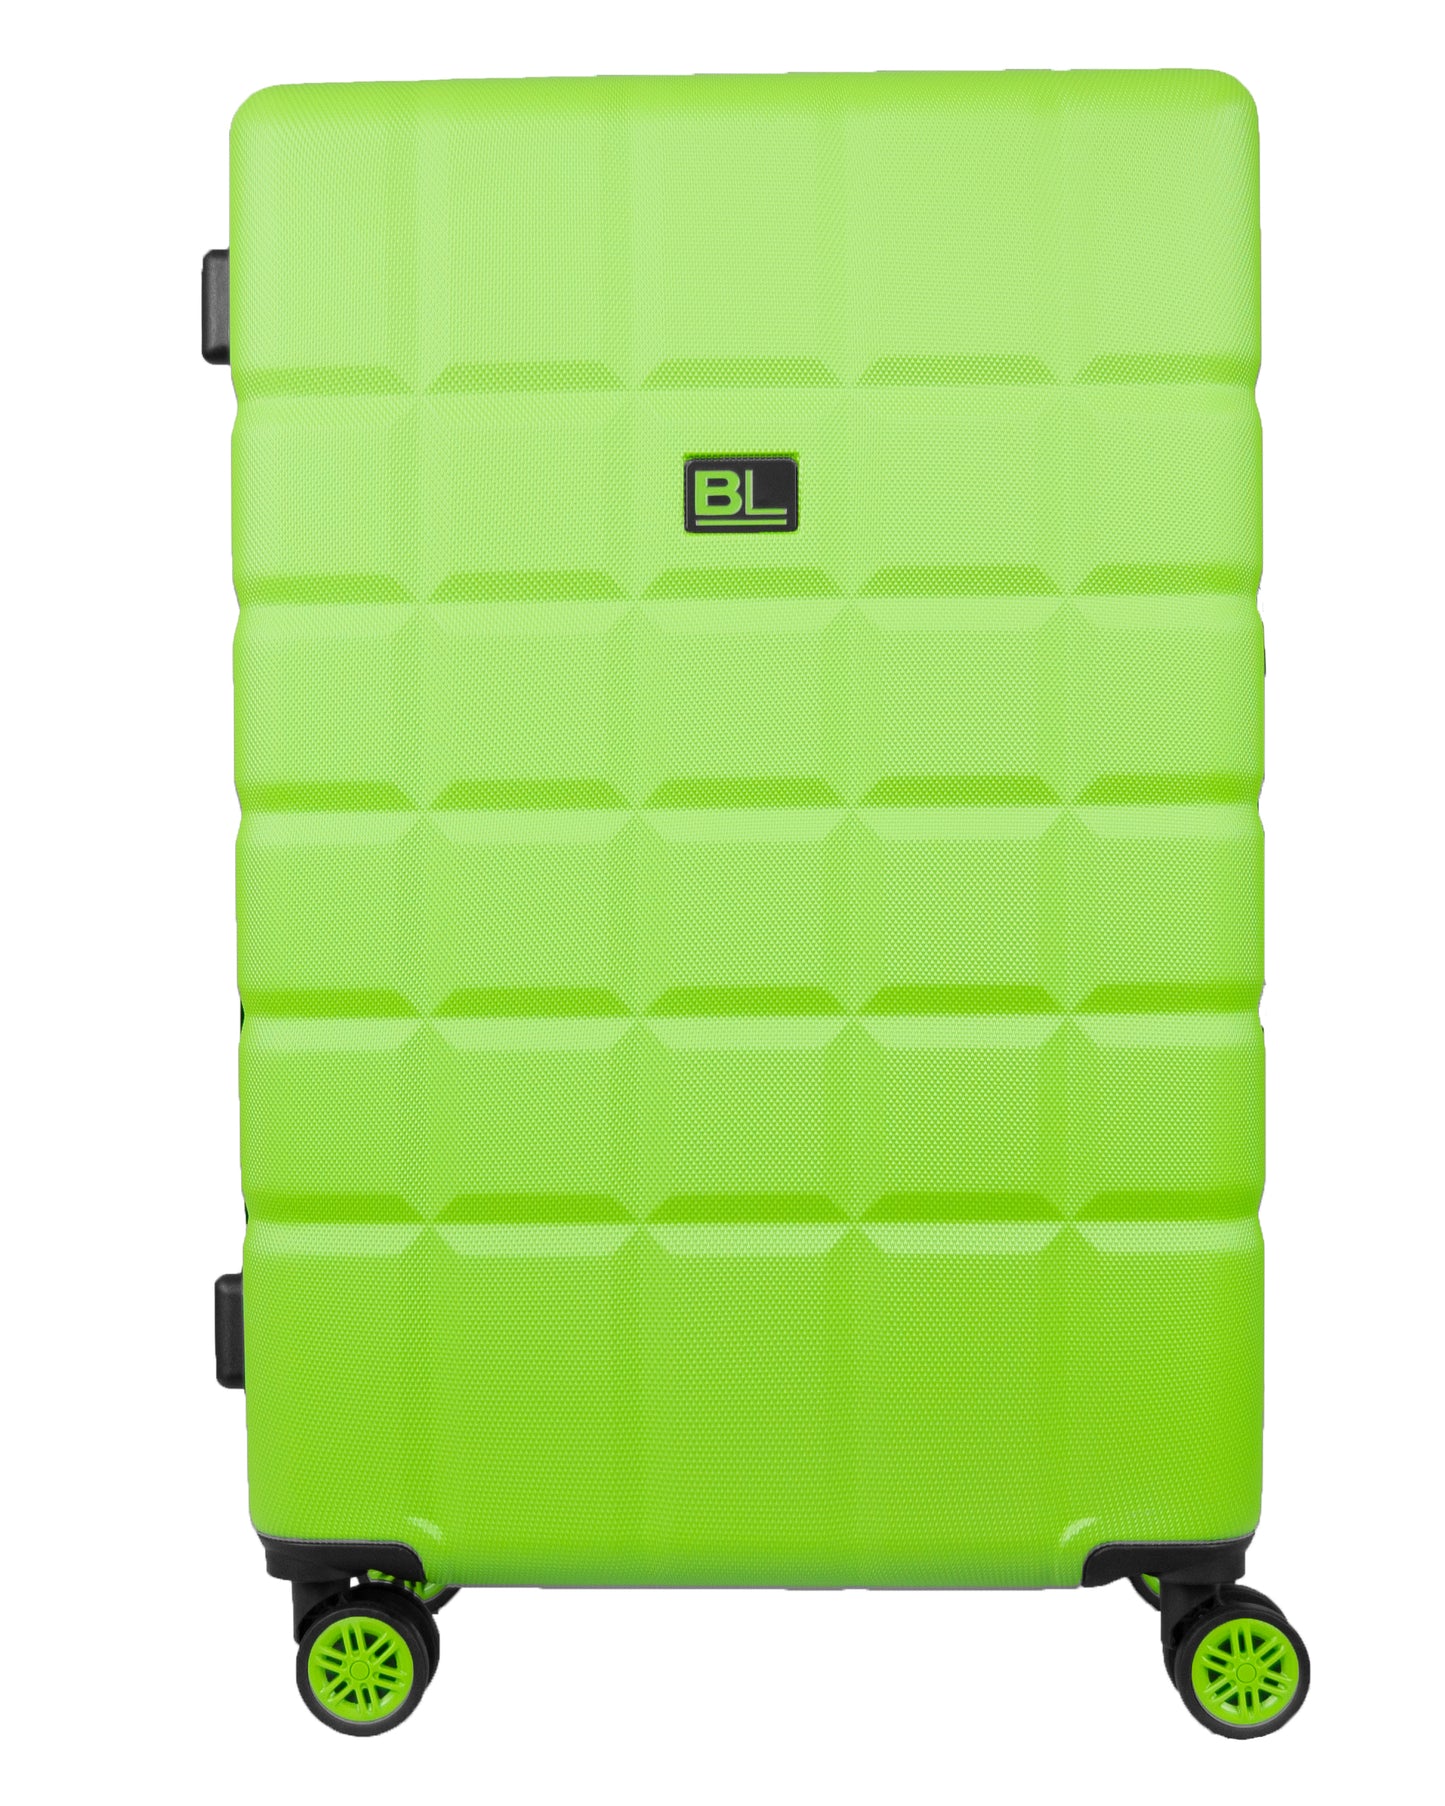 Hard Shell Luggage with 4 Spinner Wheels, Green